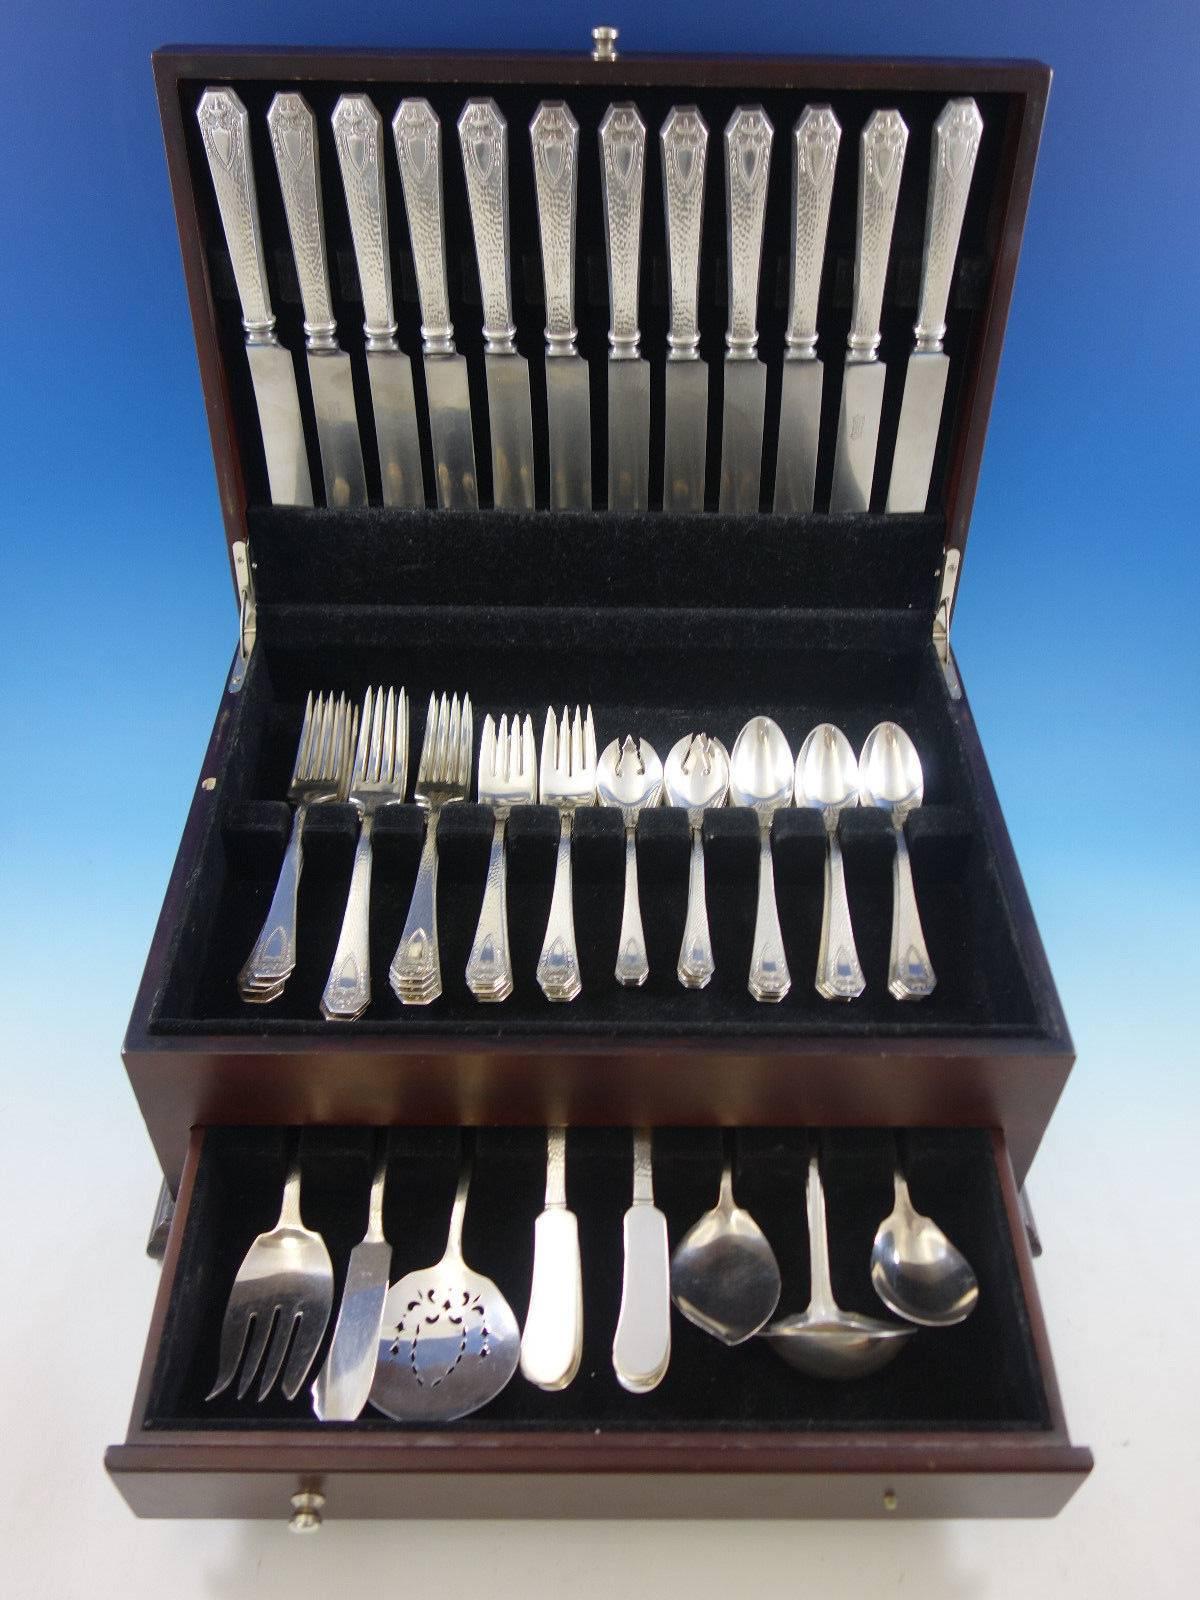 Heraldic by 1847 Rogers Bros, silver plated flatware set, 79 pieces. This set includes: 

12 dinner knives, 9 1/2